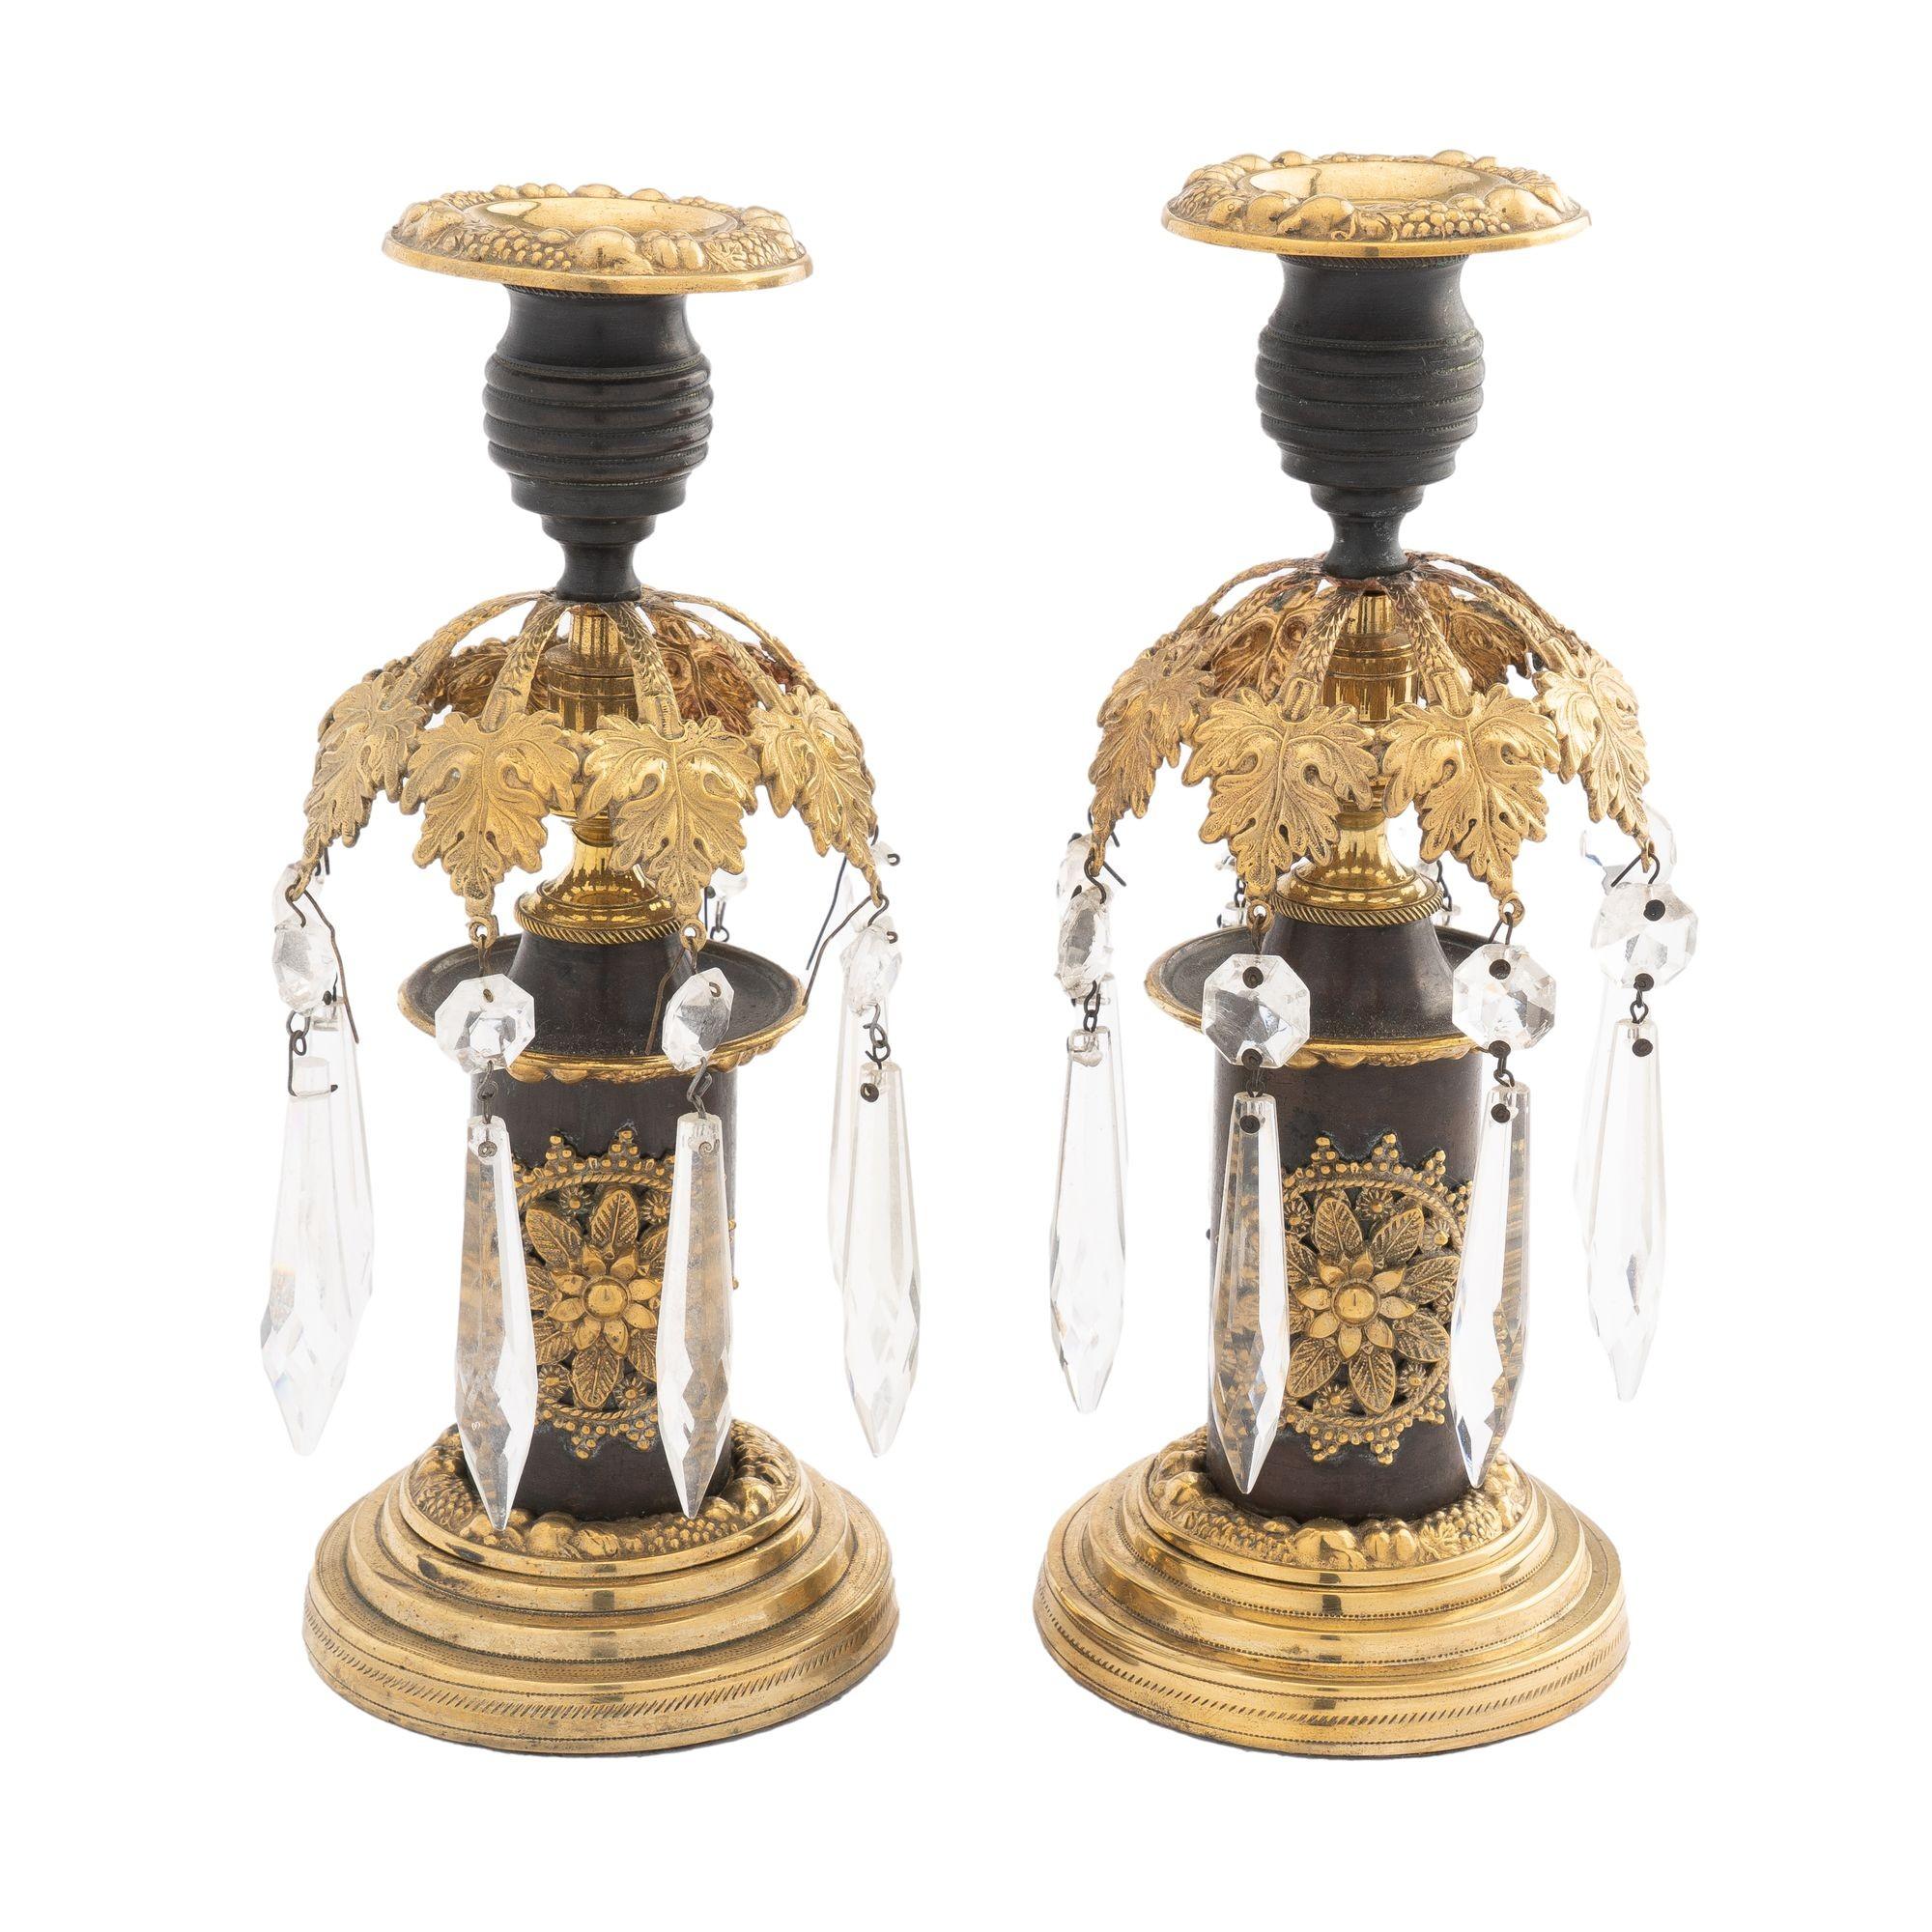 English Regency candlesticks with luster ring & cut glass lusters, c. 1800 In Excellent Condition For Sale In Kenilworth, IL